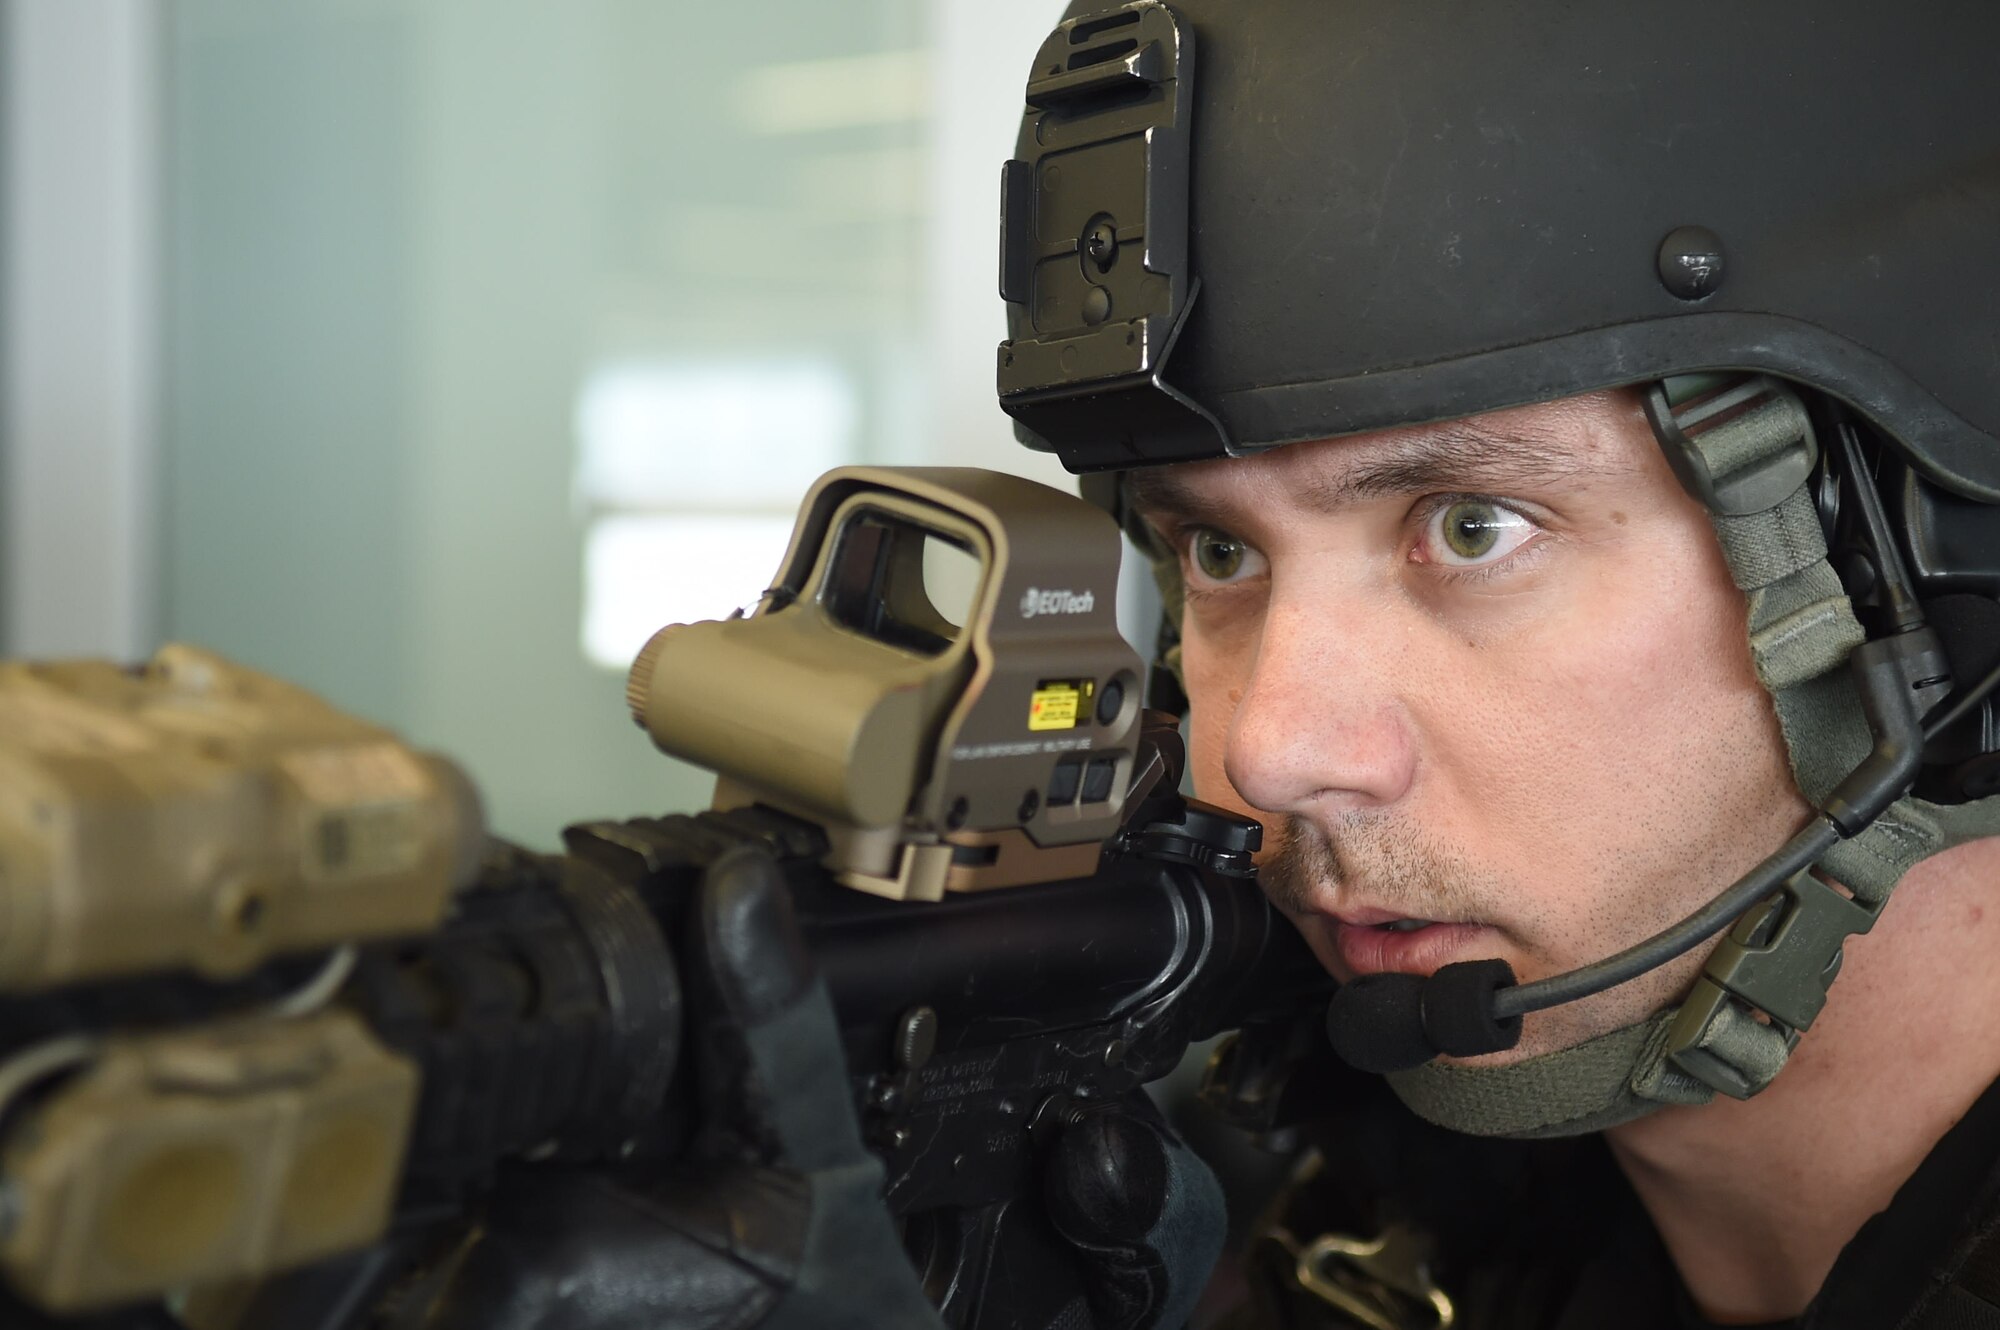 Staff Sgt. Adam Cooper, 11th Security Forces Squadron Emergency Services Team operator, clears a building during an active shooter exercise on Joint Base Andrews, Md., March 9, 2016. These exercises  help law enforcement and emergency response Airmen train, and teach military and civilian employees to stay vigilant of their surroundings. (U.S. Air Force photo by Senior Airman Mariah Haddenham/Released)